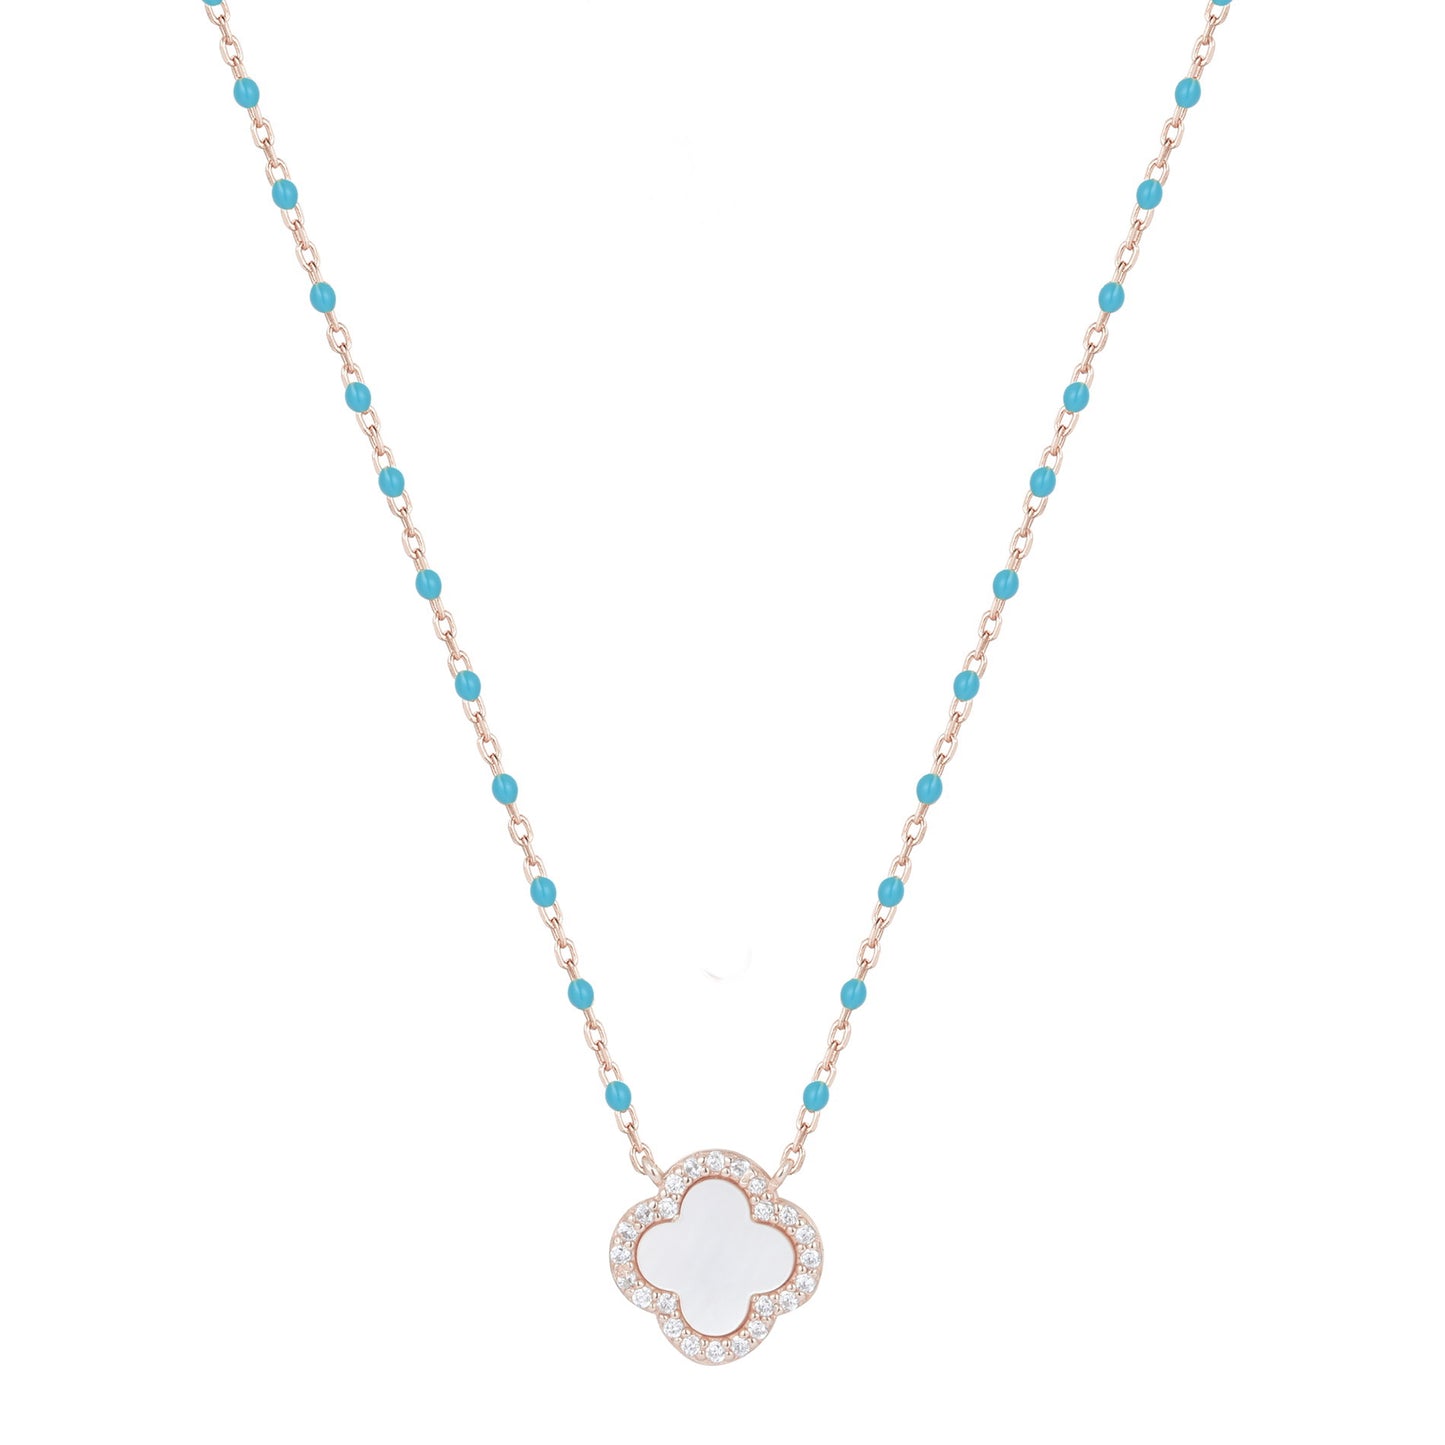 IMOGEN PEARL CLOVER BLUE BEADED ROSE GOLD NECKLACE